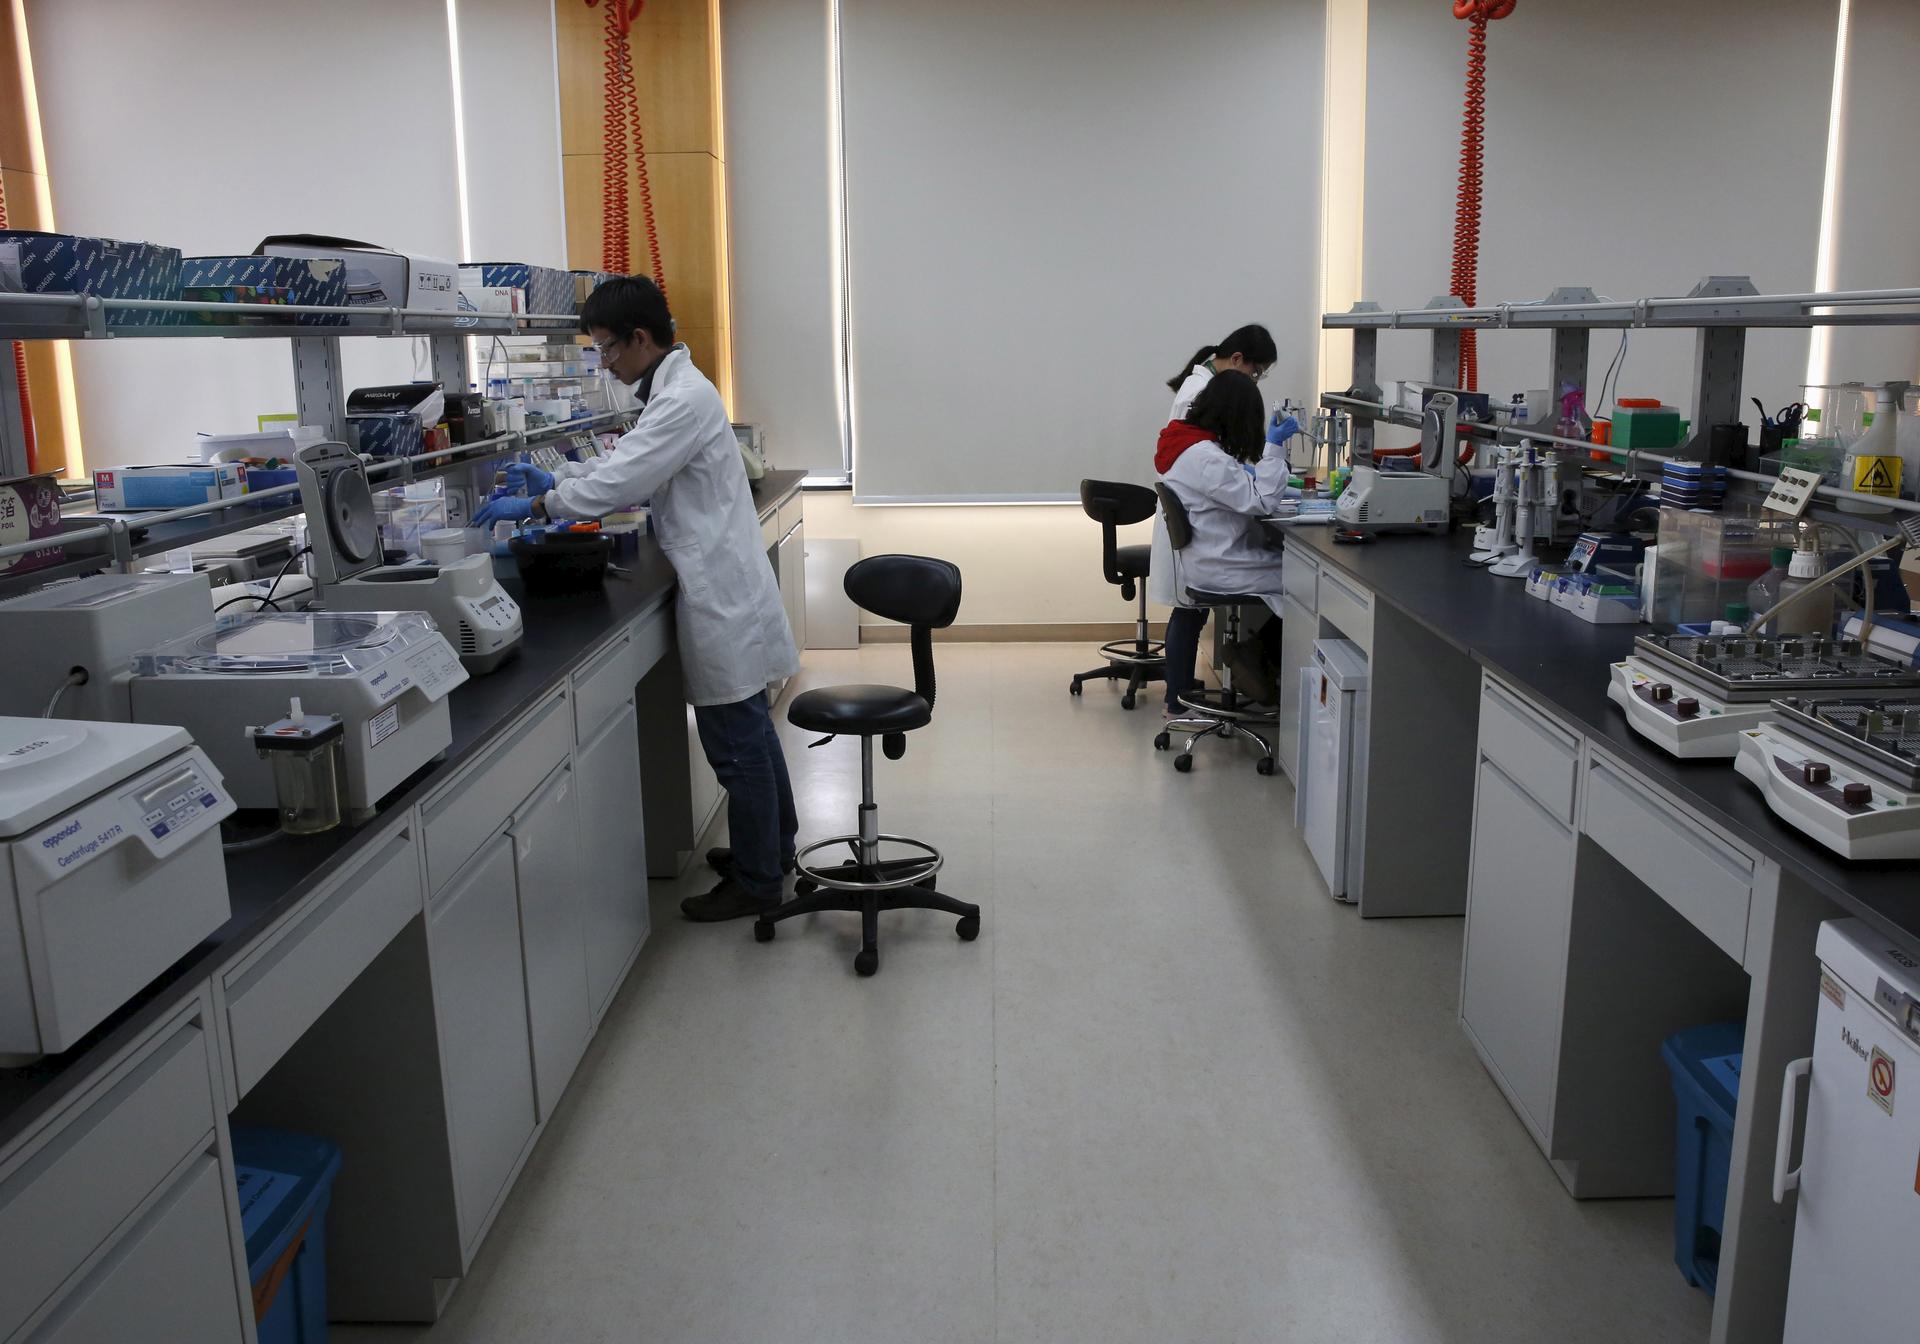 Researchers work at a lab in Syngenta Biotech Center